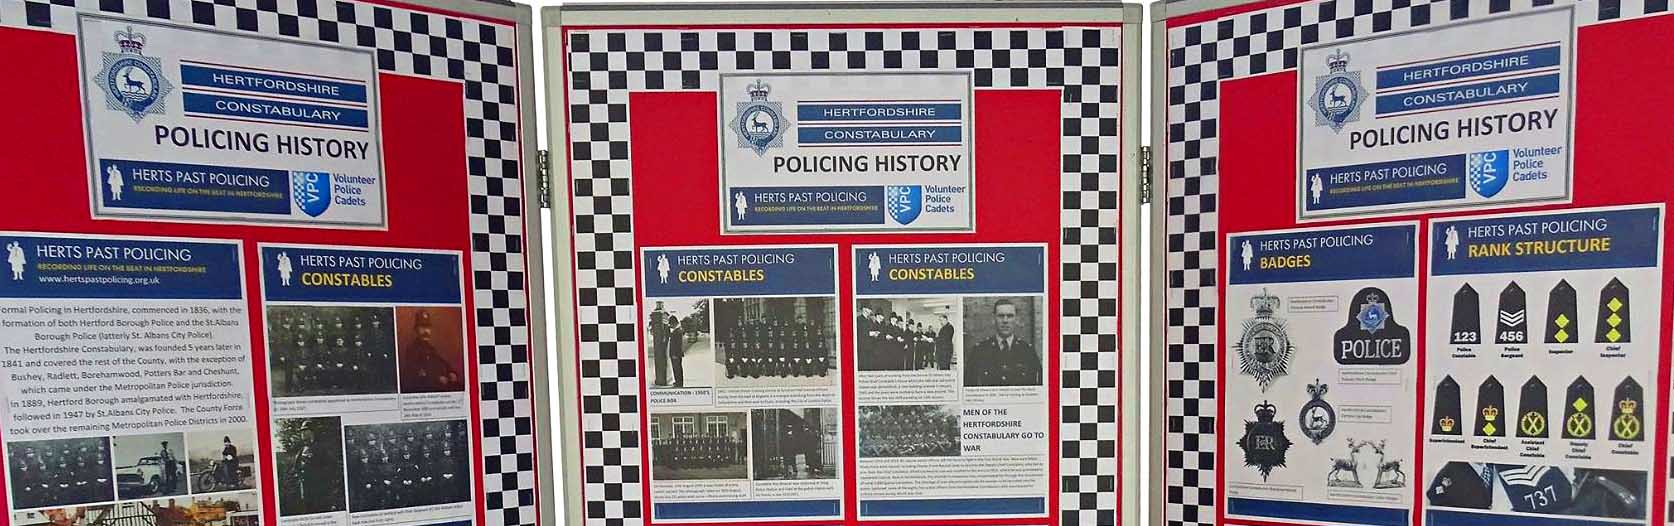 The Constabulary, policing organisation designed to provide a modern, flexible force and an effective policing service for Hertfordshire. Armed Policing Unit, Dog Unit, Road Policing Unit, Major Crime Unit.